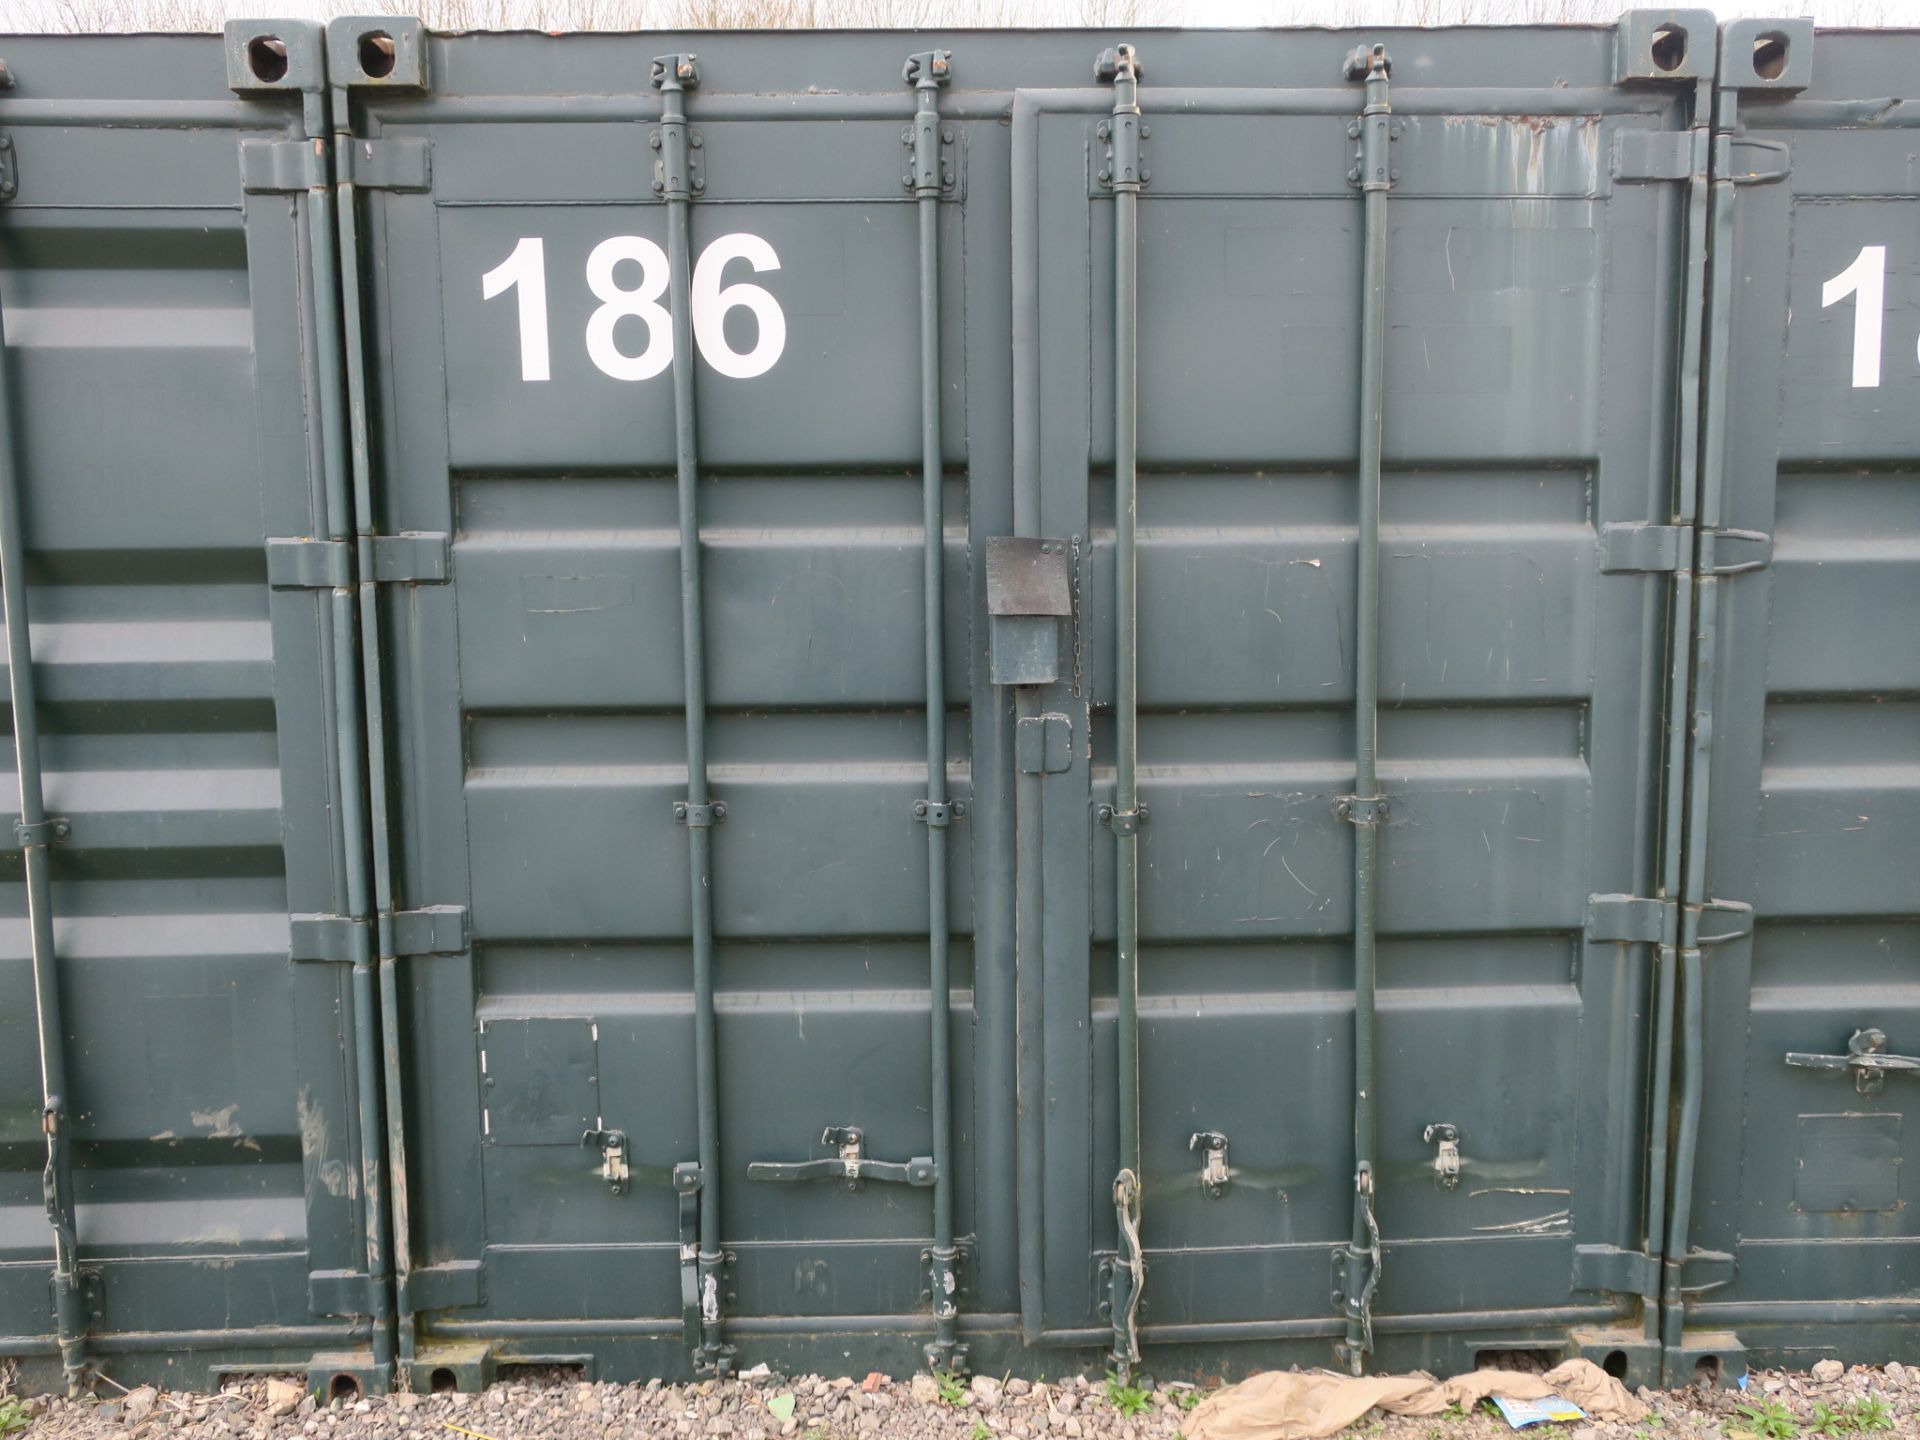 * 40ft shipping container (ID 186) with insulated roof. Sold loaded free onto buyers transport.